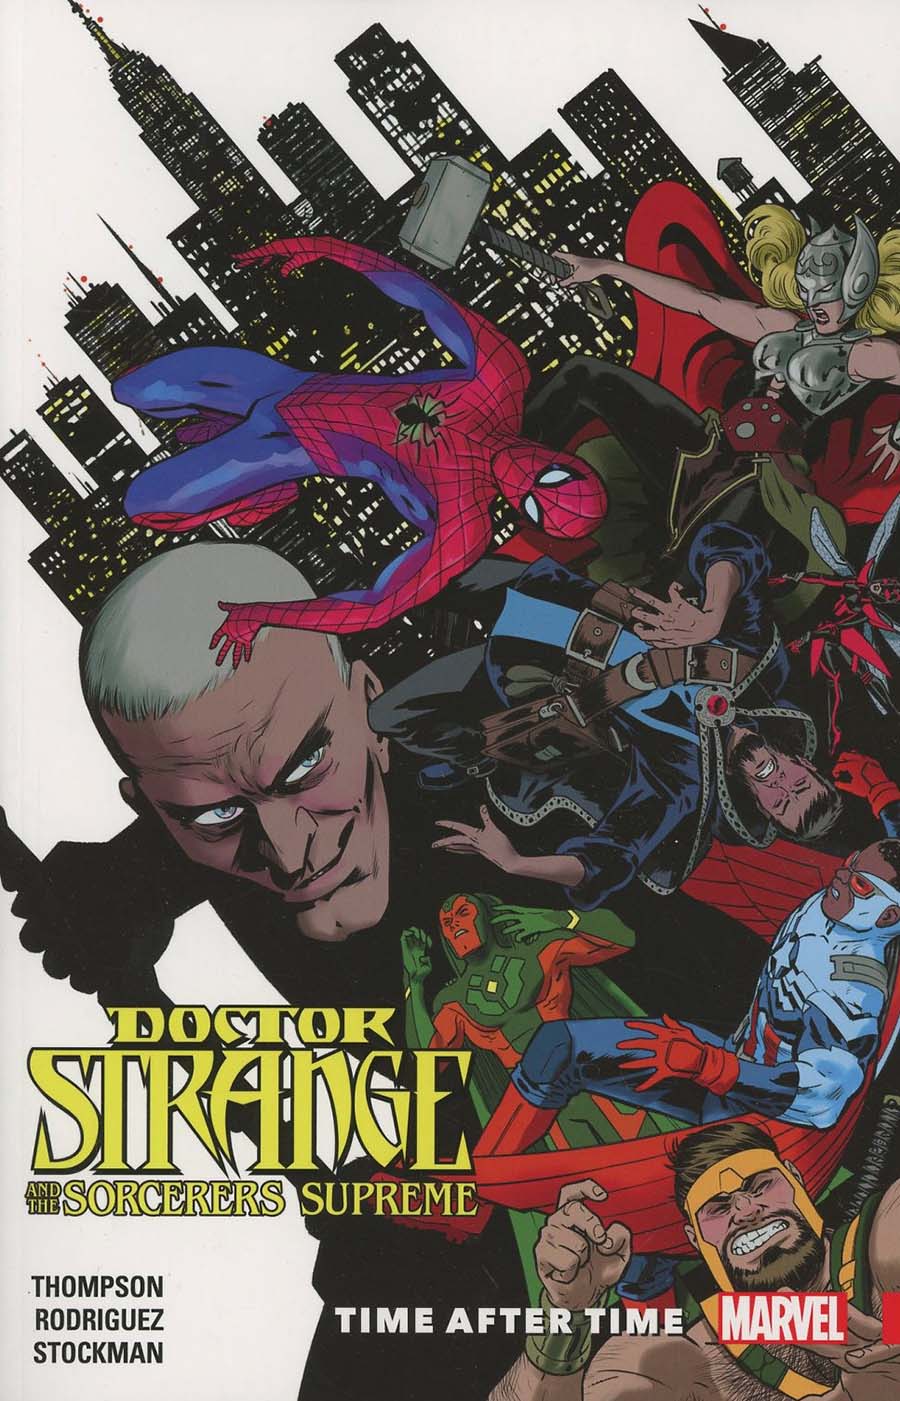 Doctor Strange And The Sorcerers Supreme Vol 2 Time After Time TP